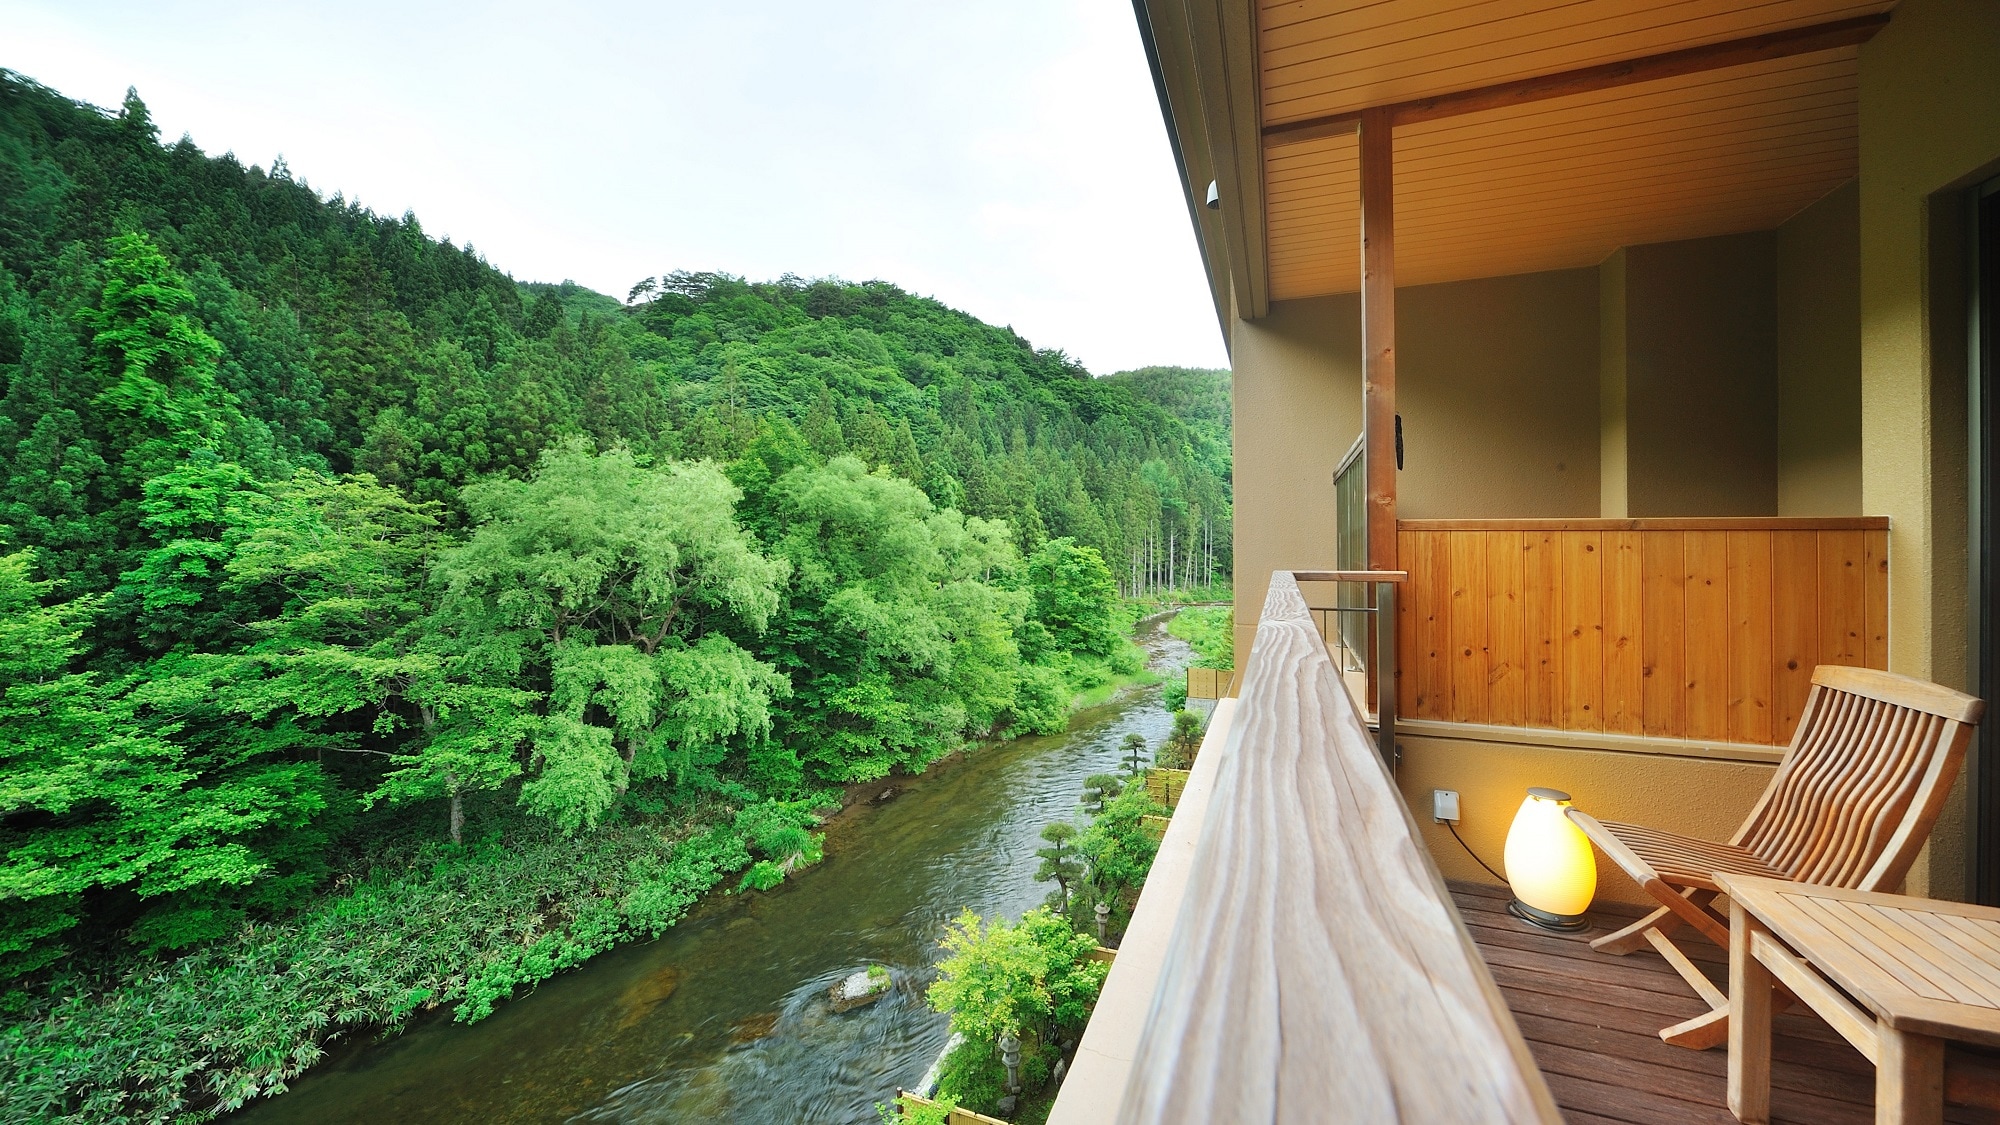 4th floor maisonette Japanese modern style with a view of the Toyosawa River below from the balcony.